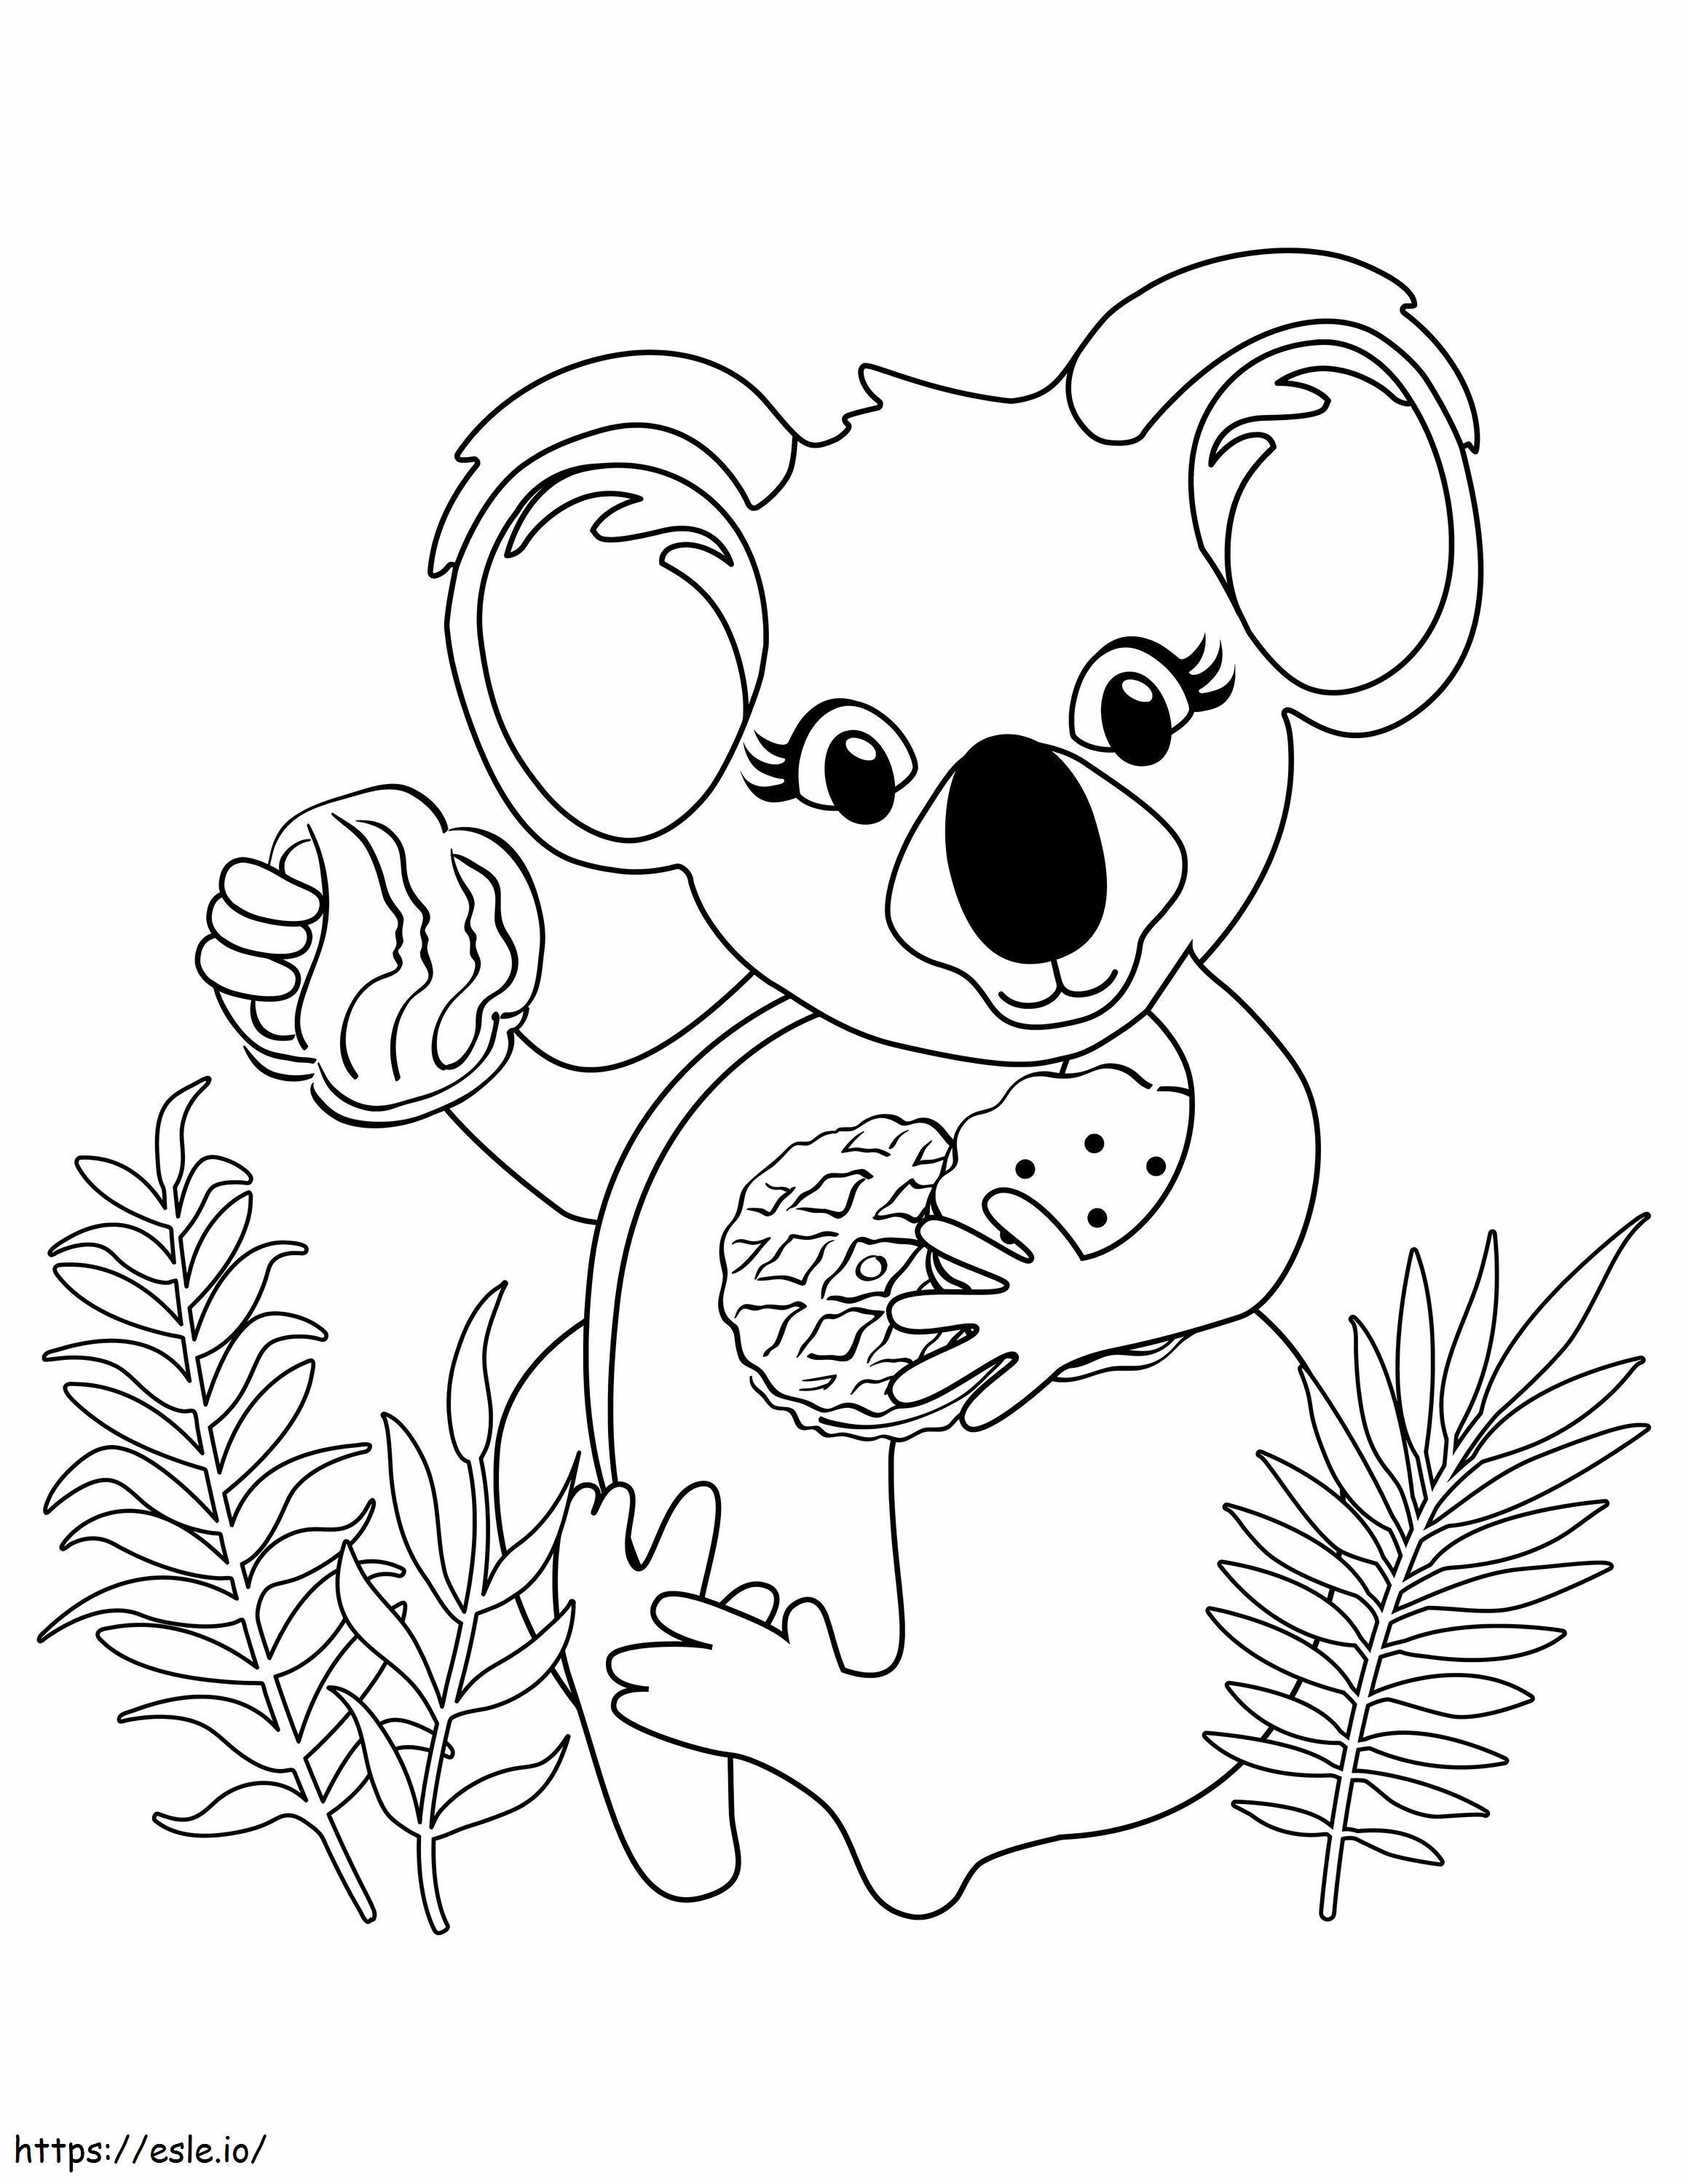 Koala With Cookies coloring page